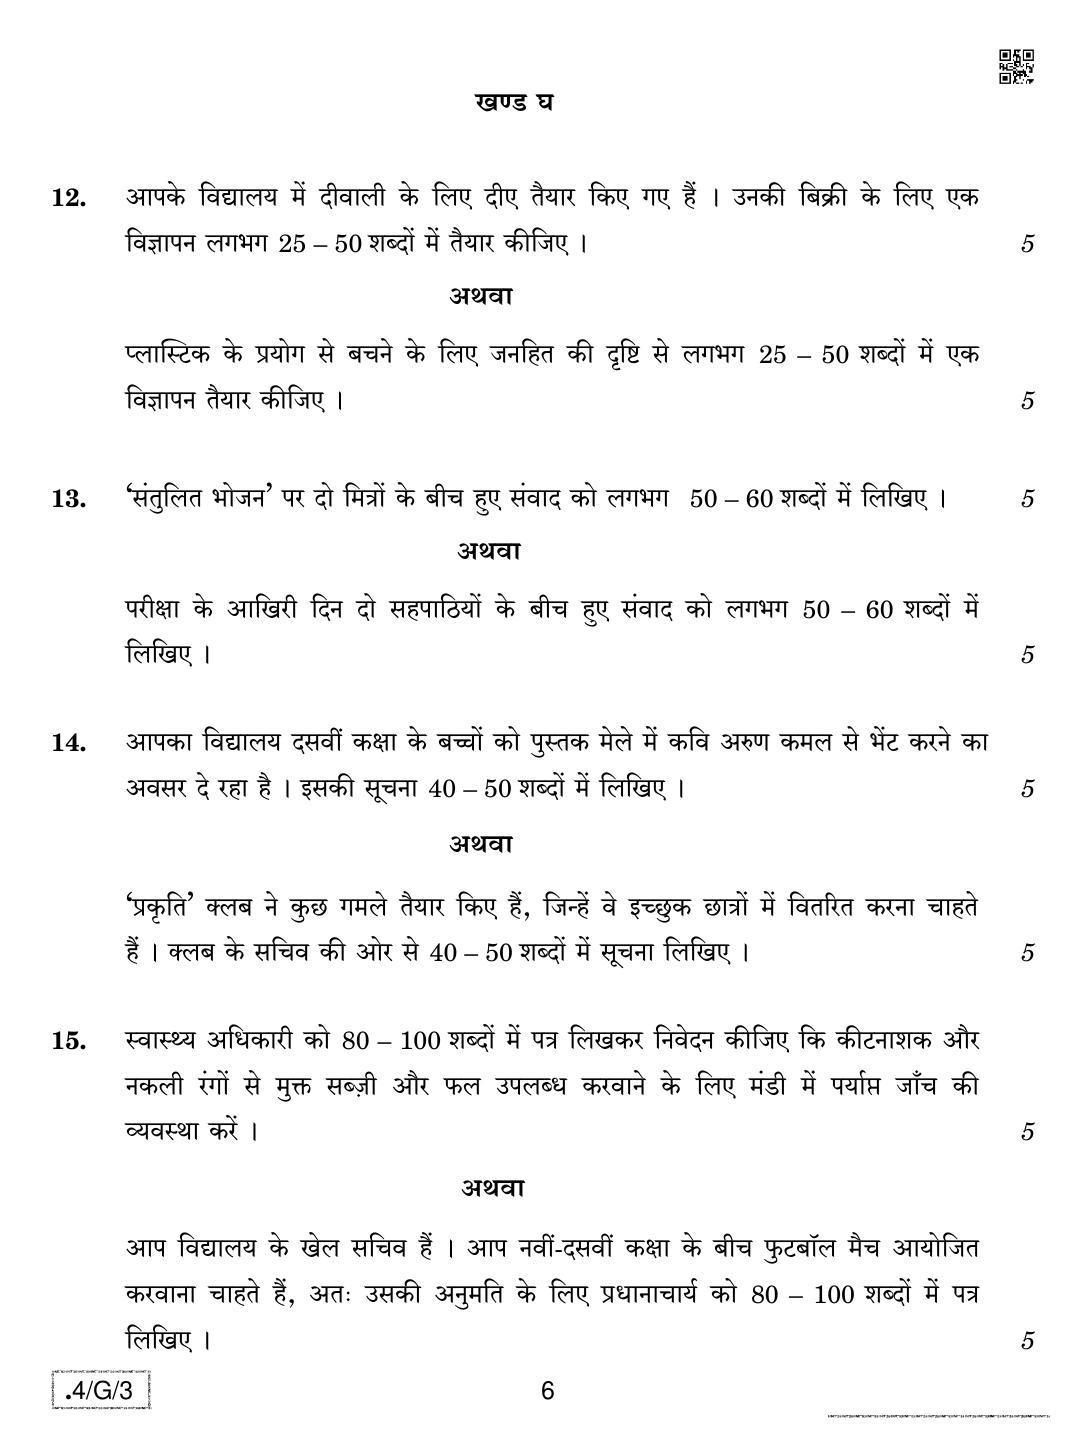 CBSE Class 10 4-C-3 Hindi B 2020 Compartment Question Paper - Page 6